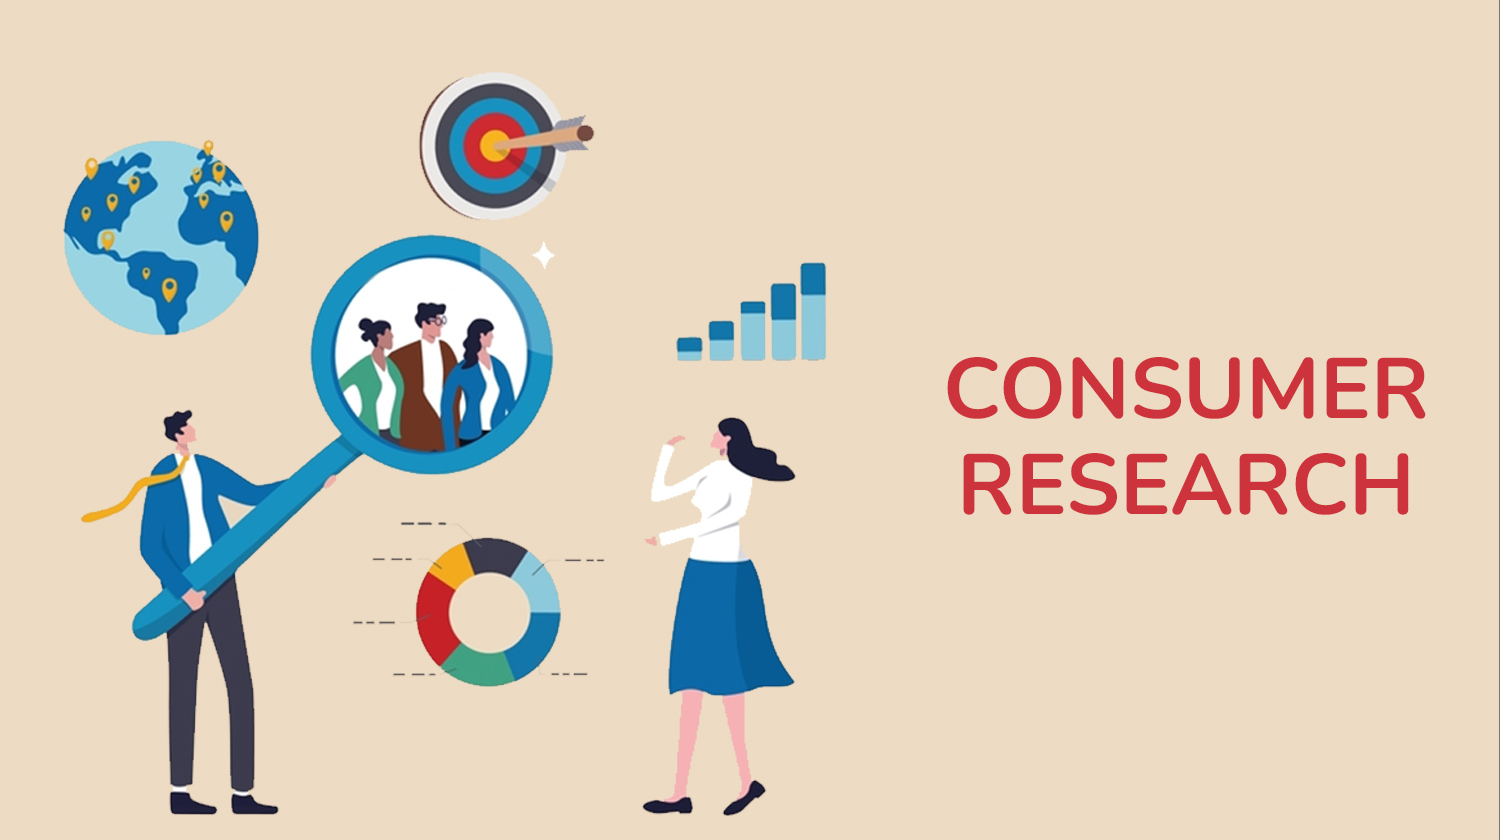 consumer research is used for